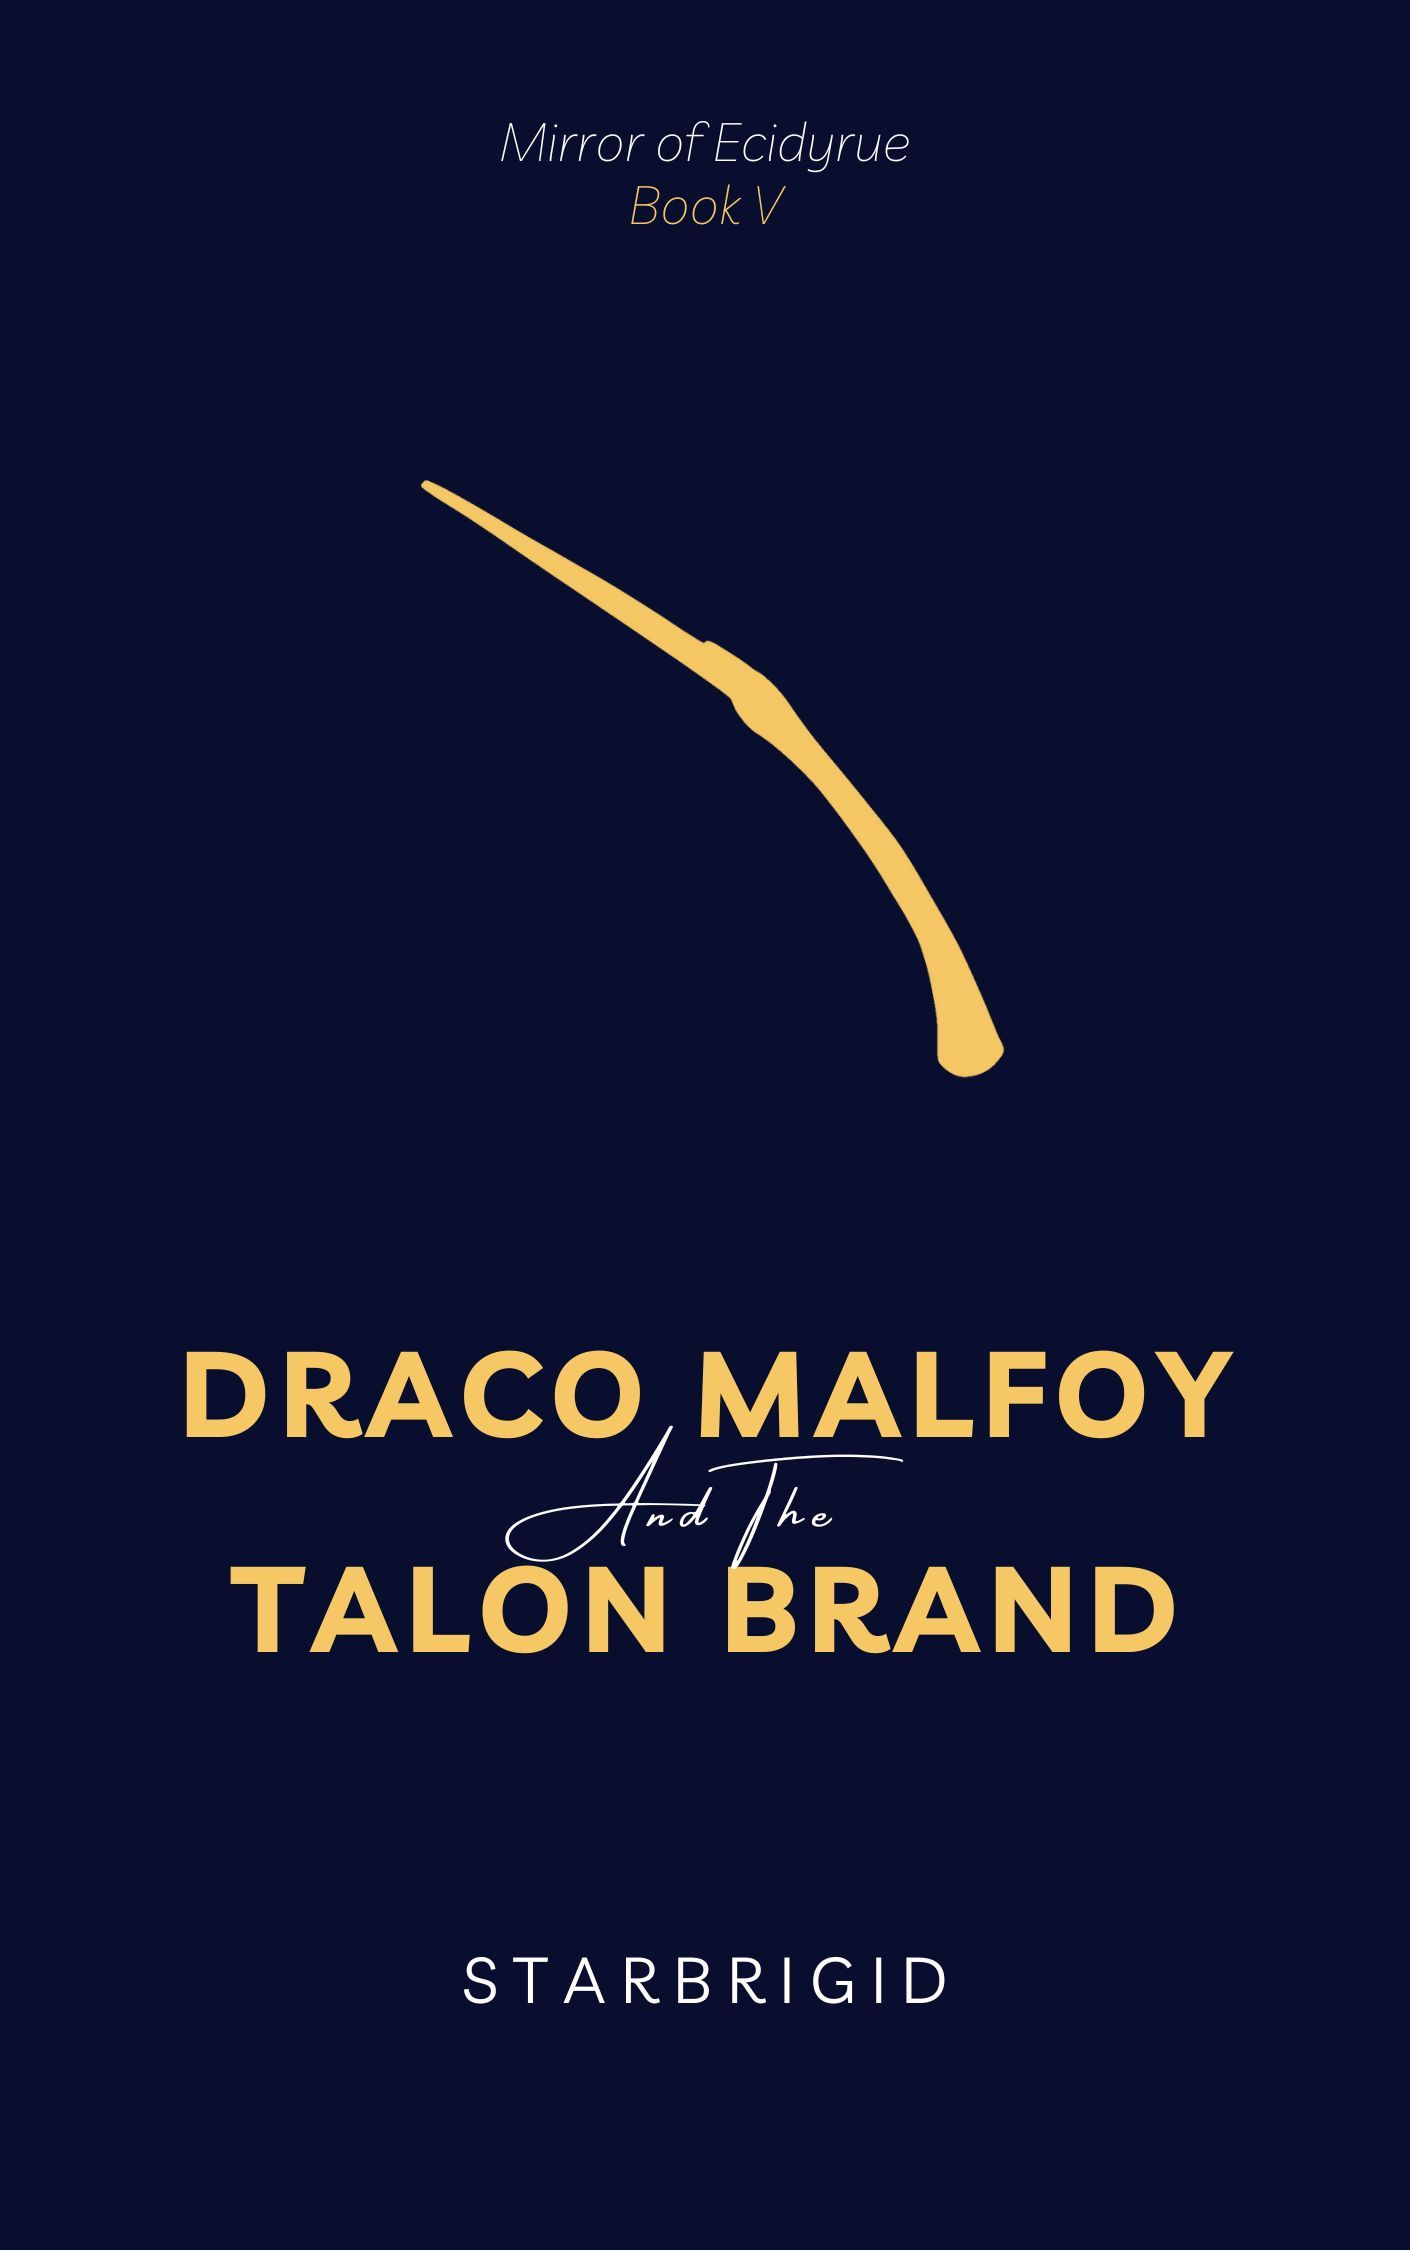 Cover of Draco Malfoy and the Talon Brand.